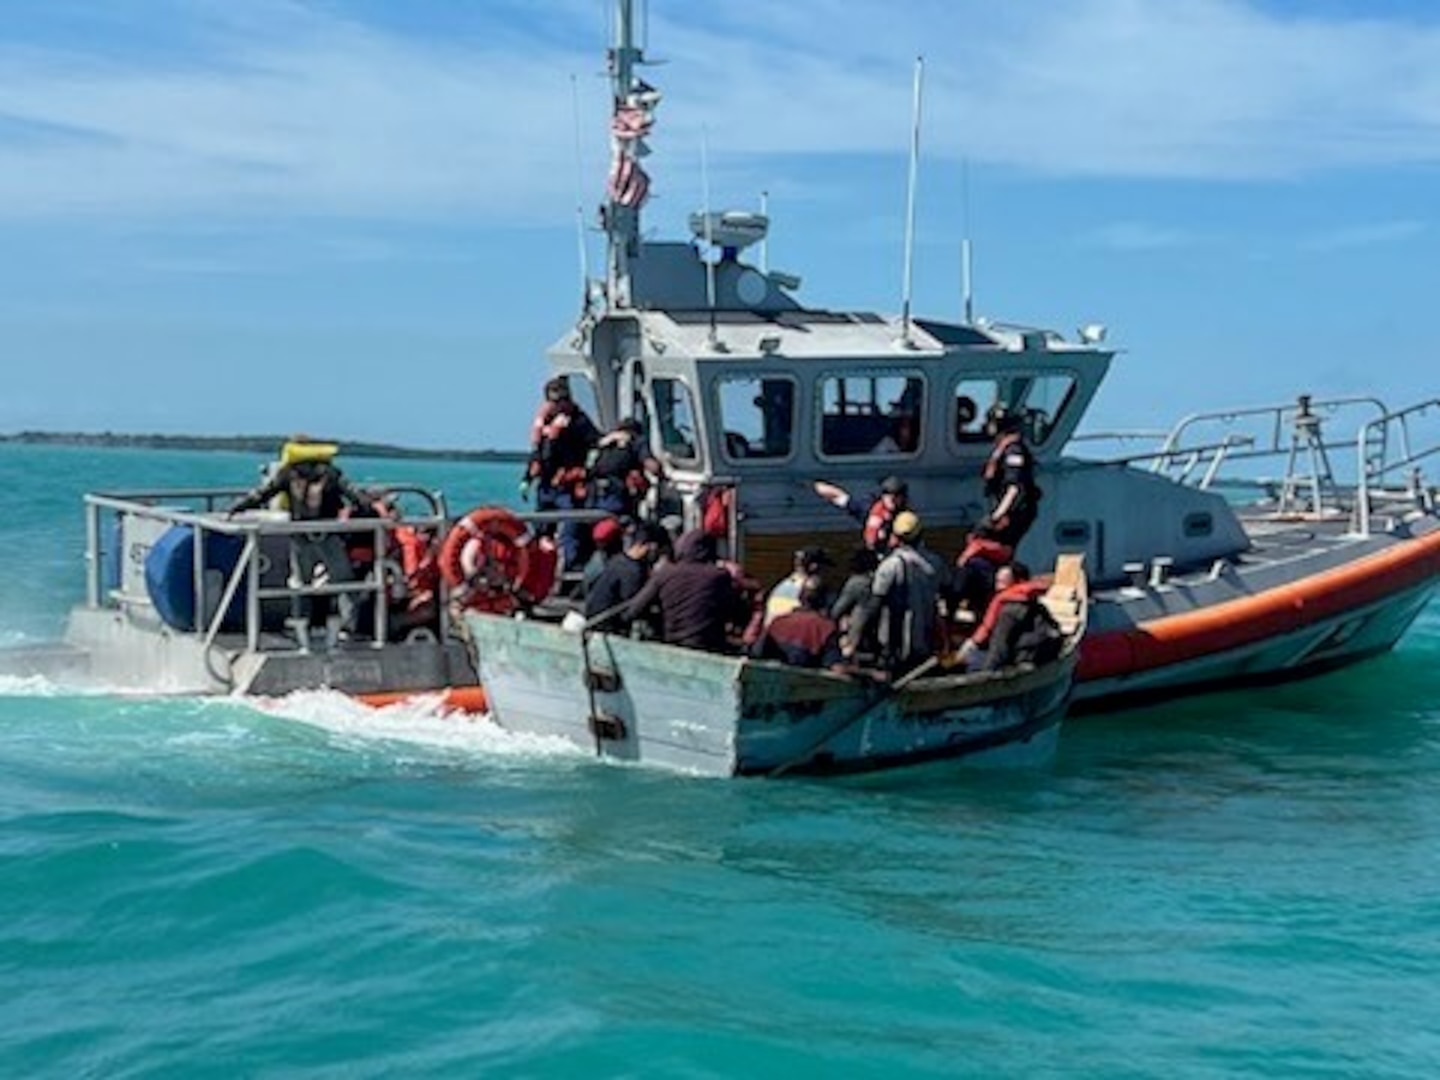 Boat with migrants aboard adjacent to Coast Guard small boat. Second picture depicts the vessel disembarked.